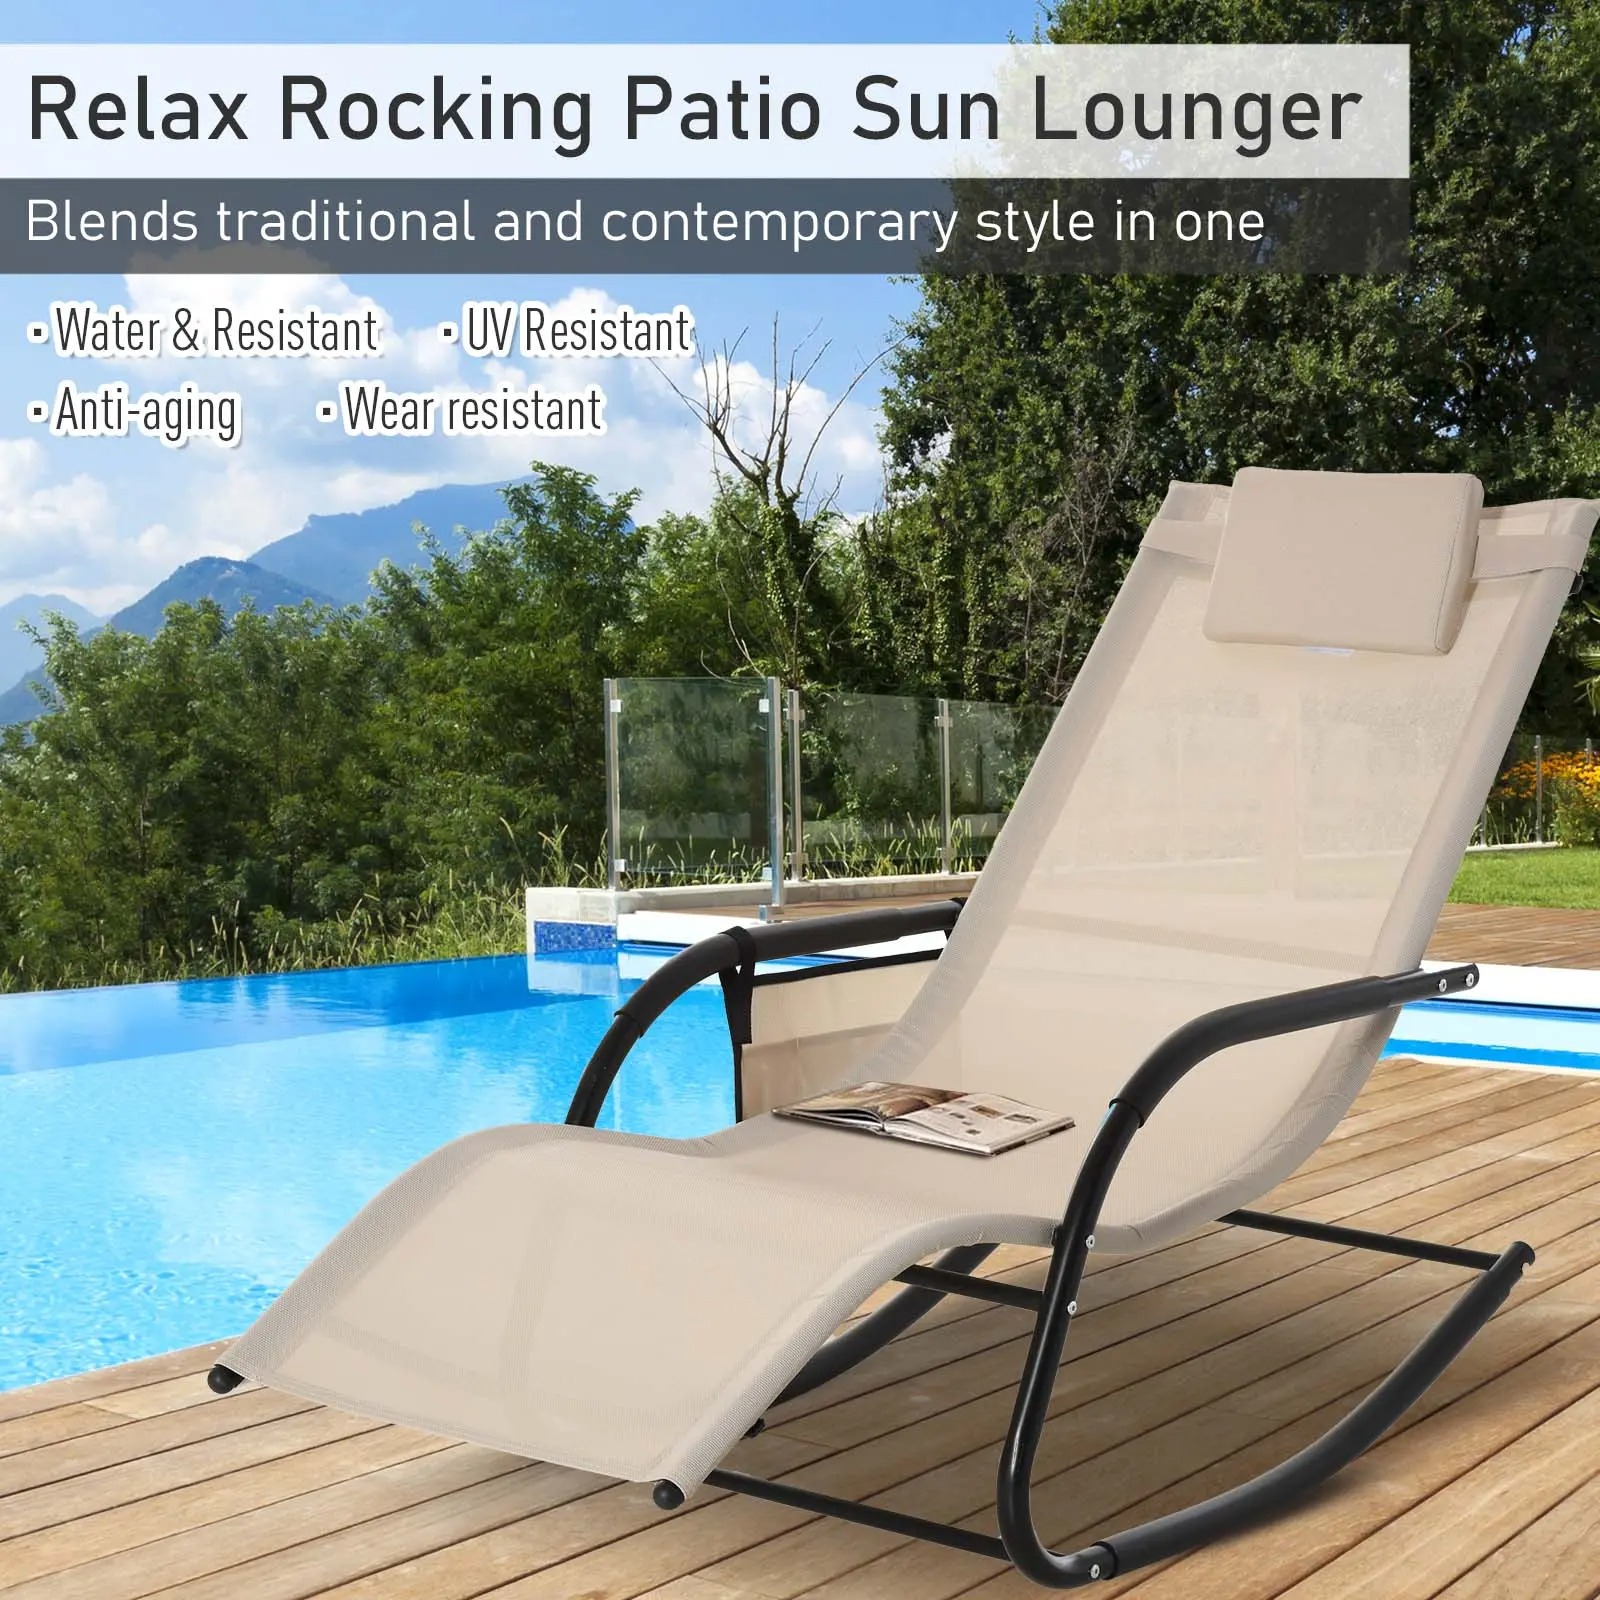 Rocking Recliner, Sling Sun Lounger with Removable Headrest, Cream White